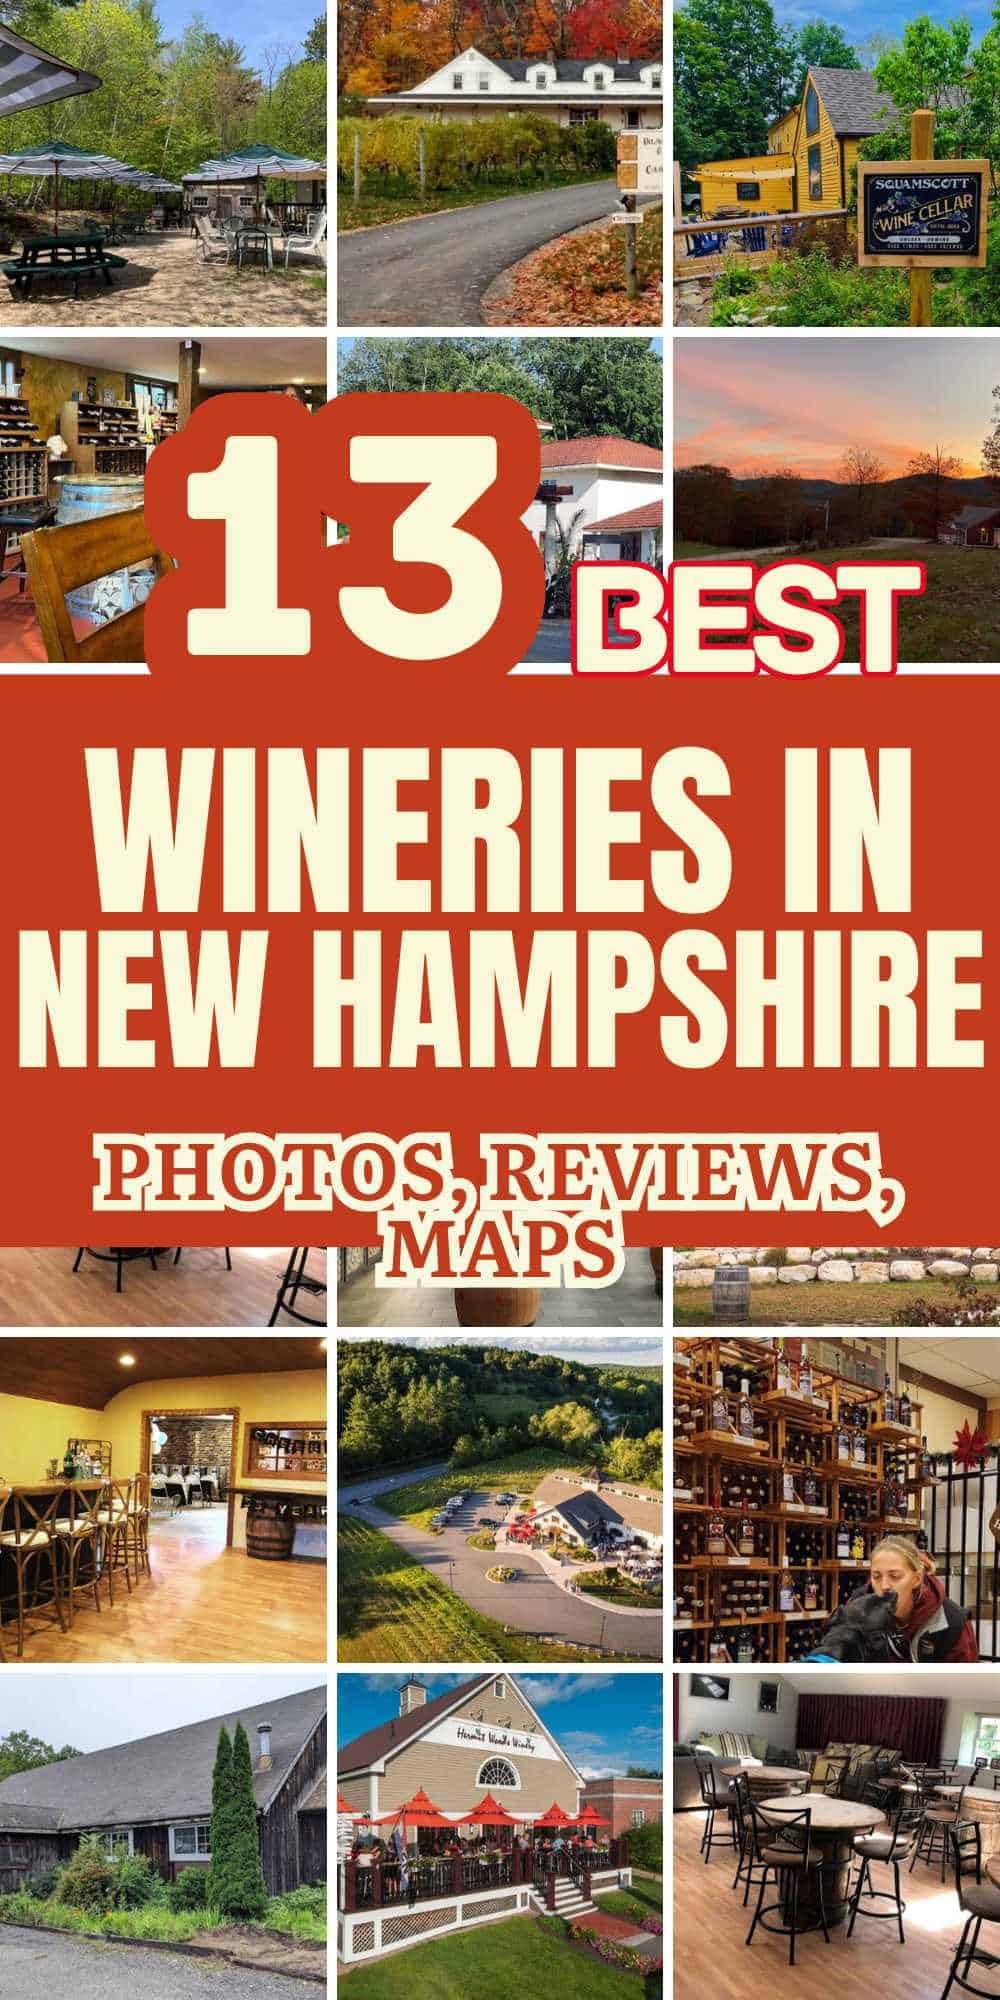 Wineries in New Hampshire